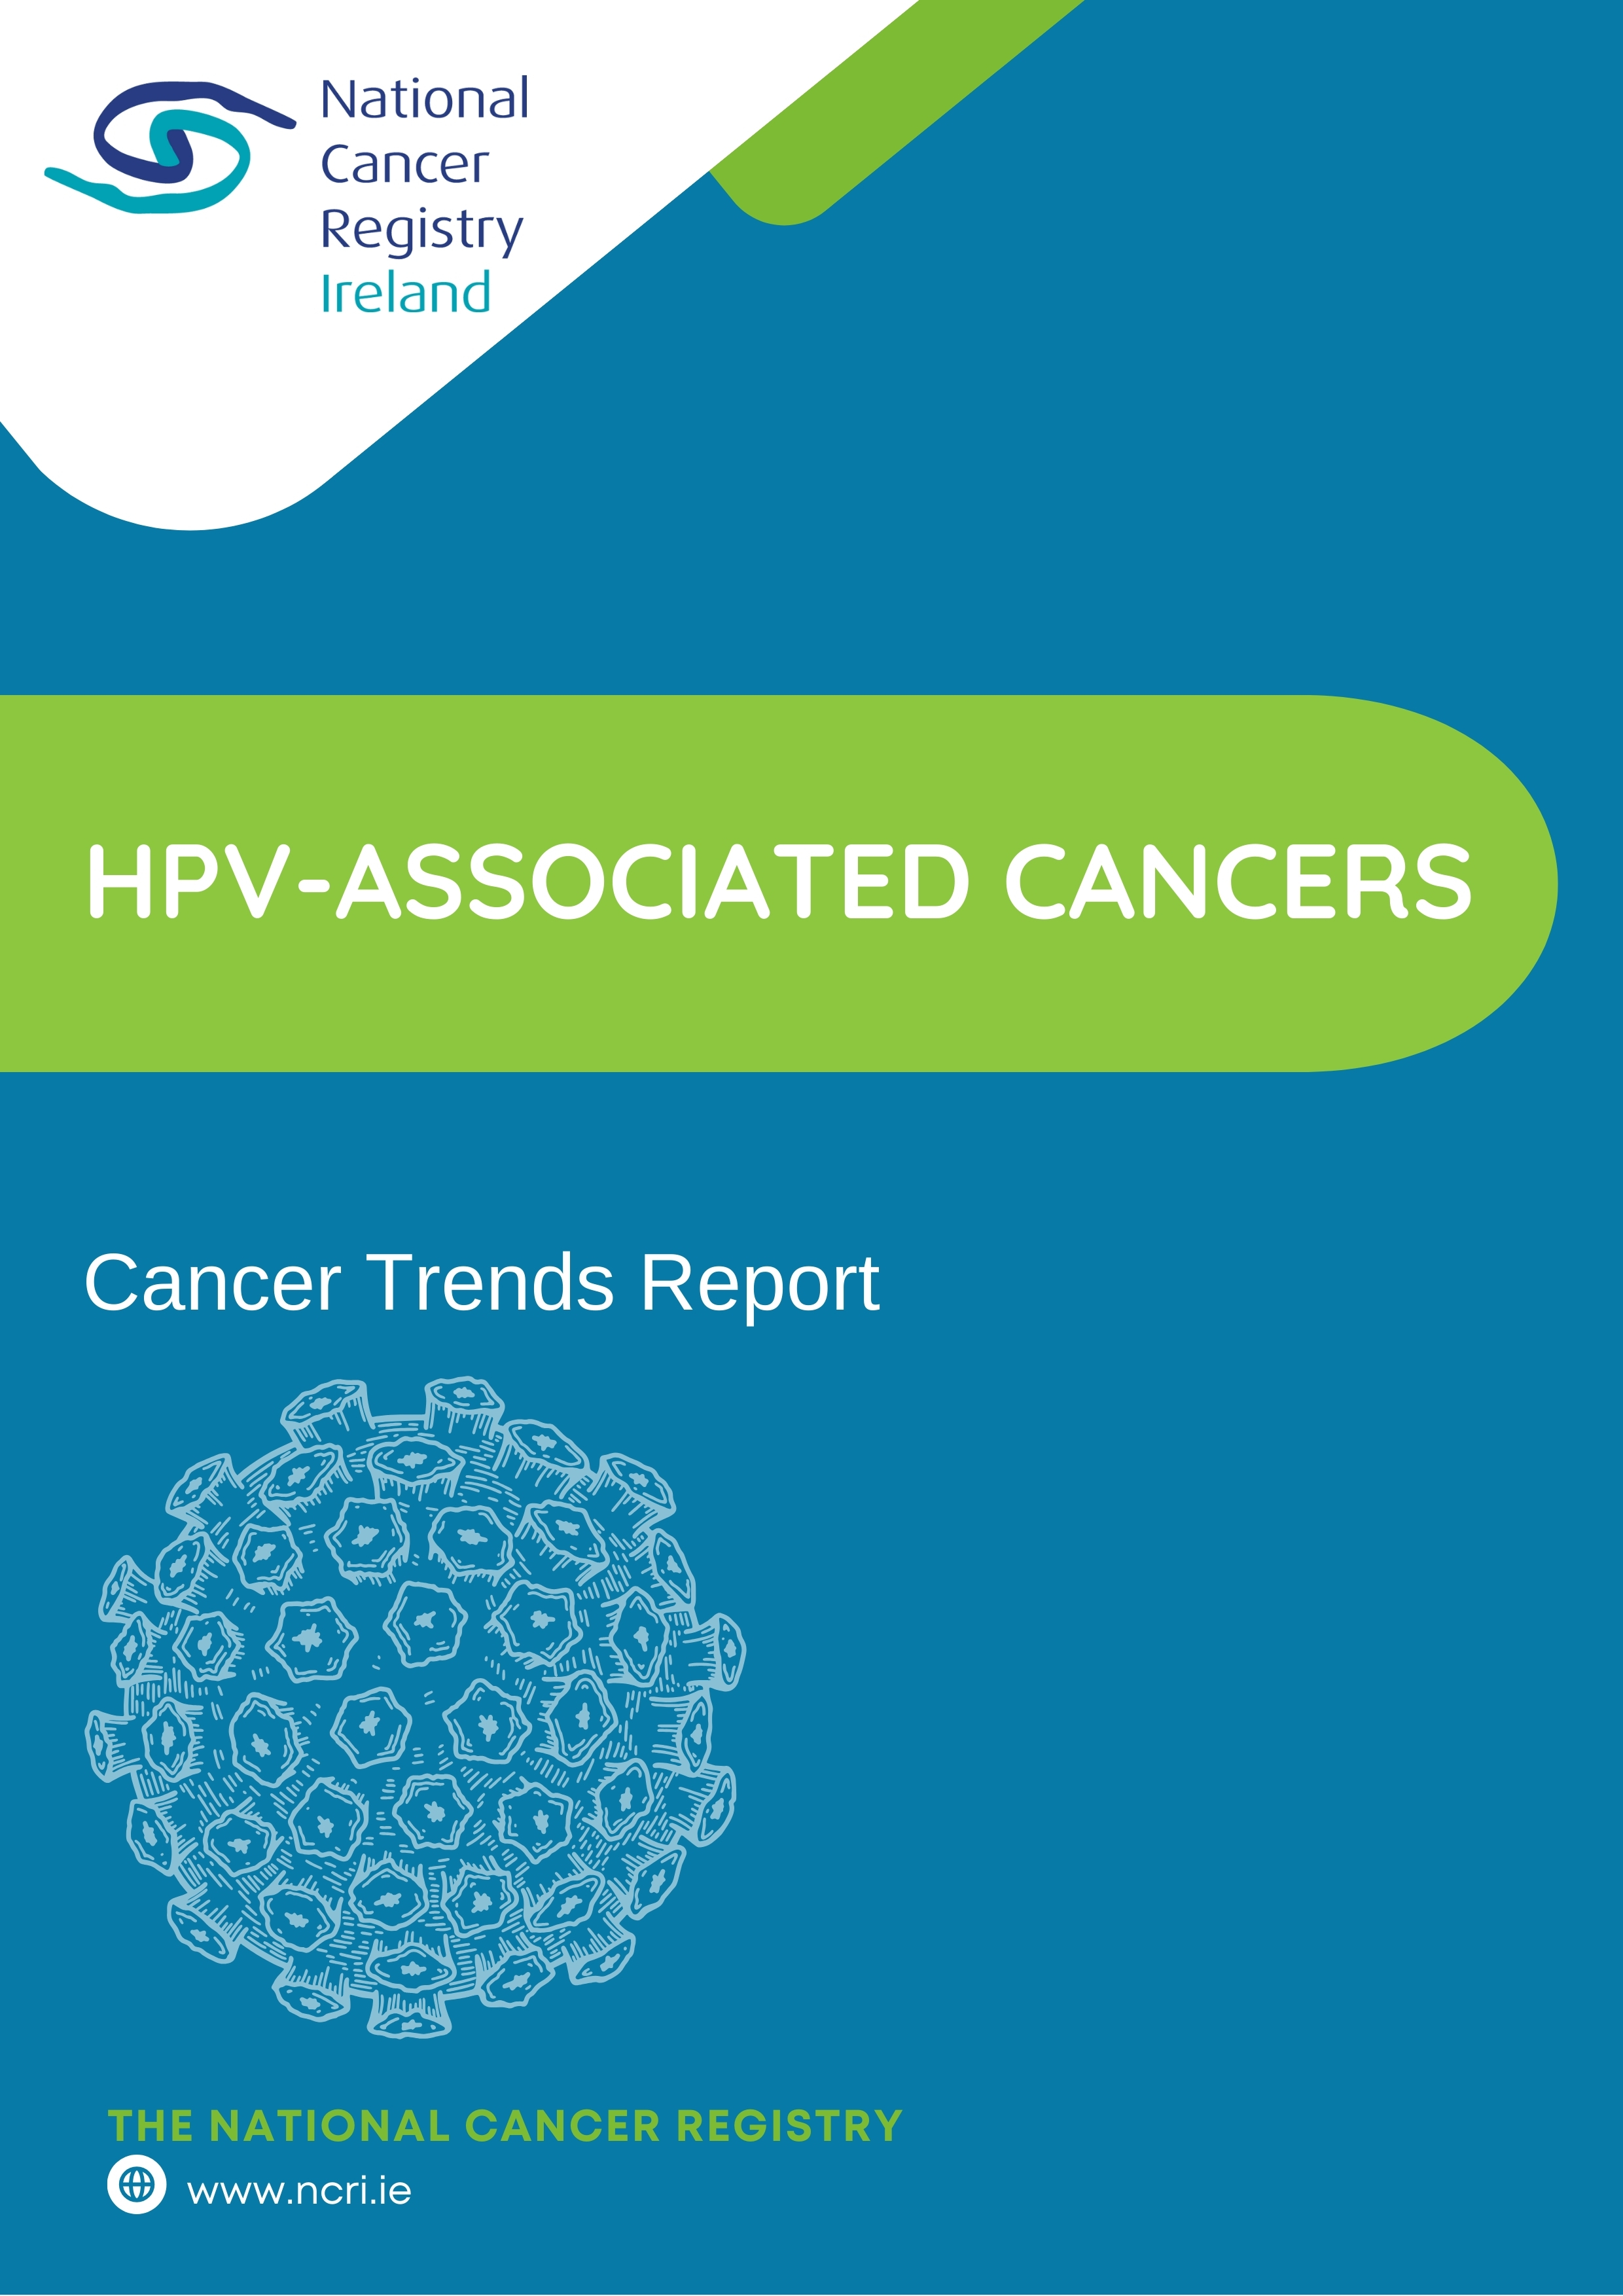 Cancer Trends 39 - HPV Associated Cancers